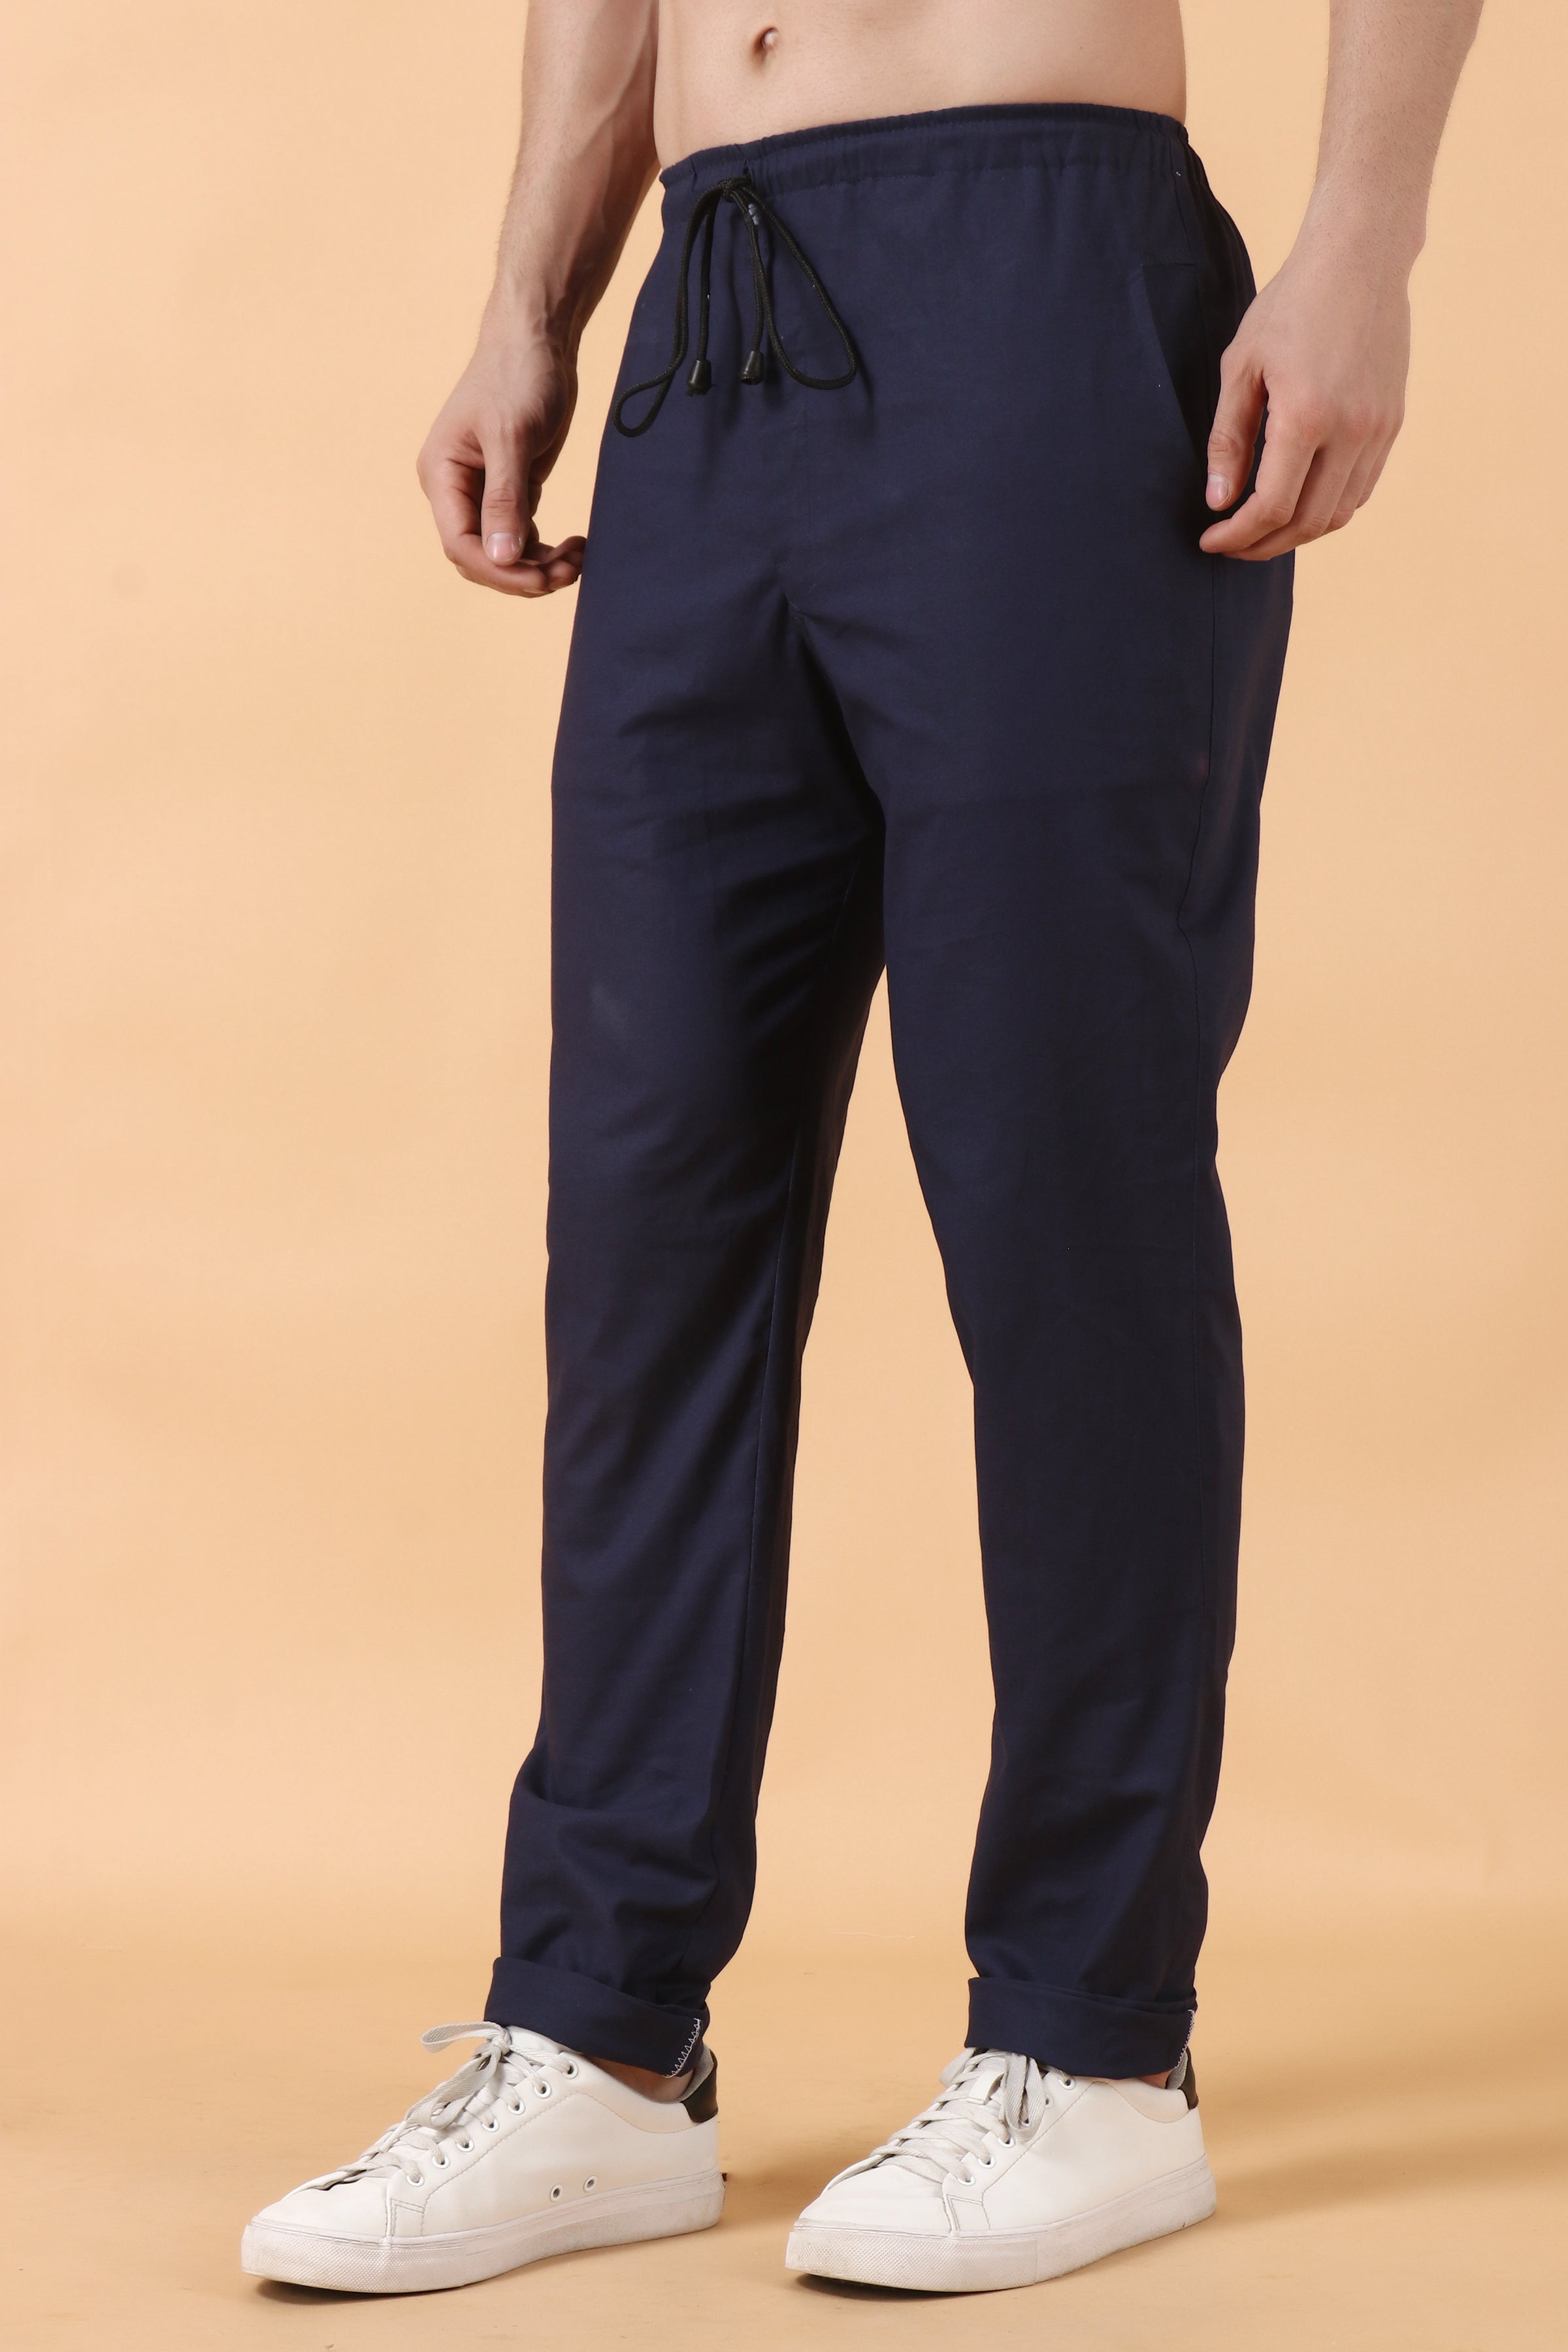 Adidas Mens Originals Adibreak Track Pants L Night Cargo in Chennai at  best price by Expert Corporate Solutions  Justdial